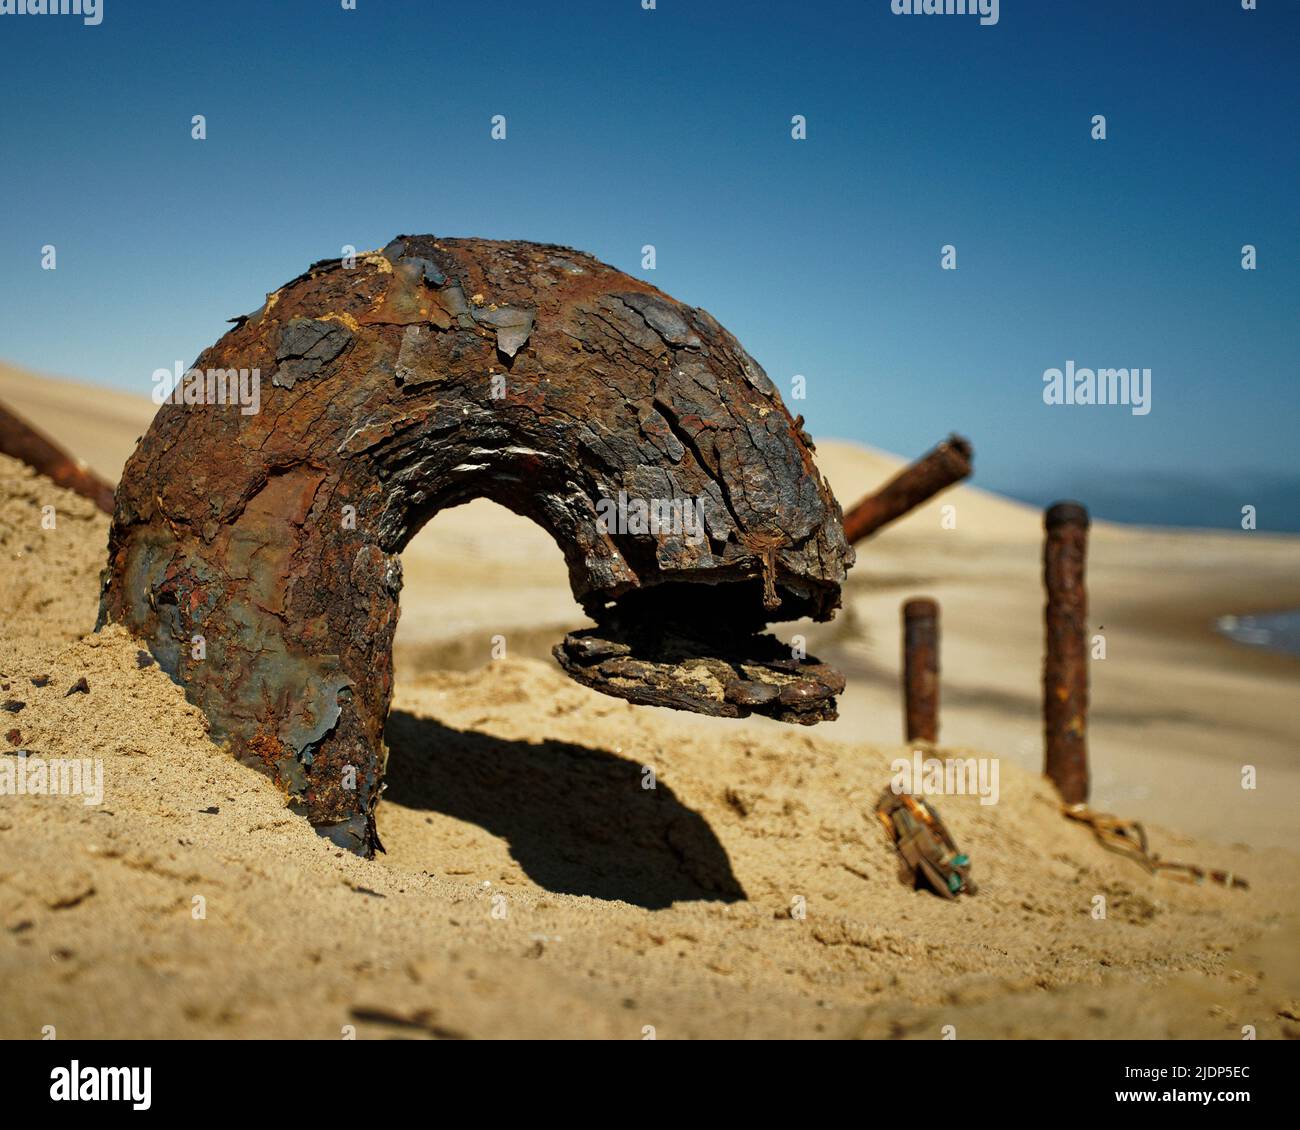 Close up detail of the Shawnee, a ship that was wrecked on the Skeleton Coast of Namibia, south west Africa. Stock Photo